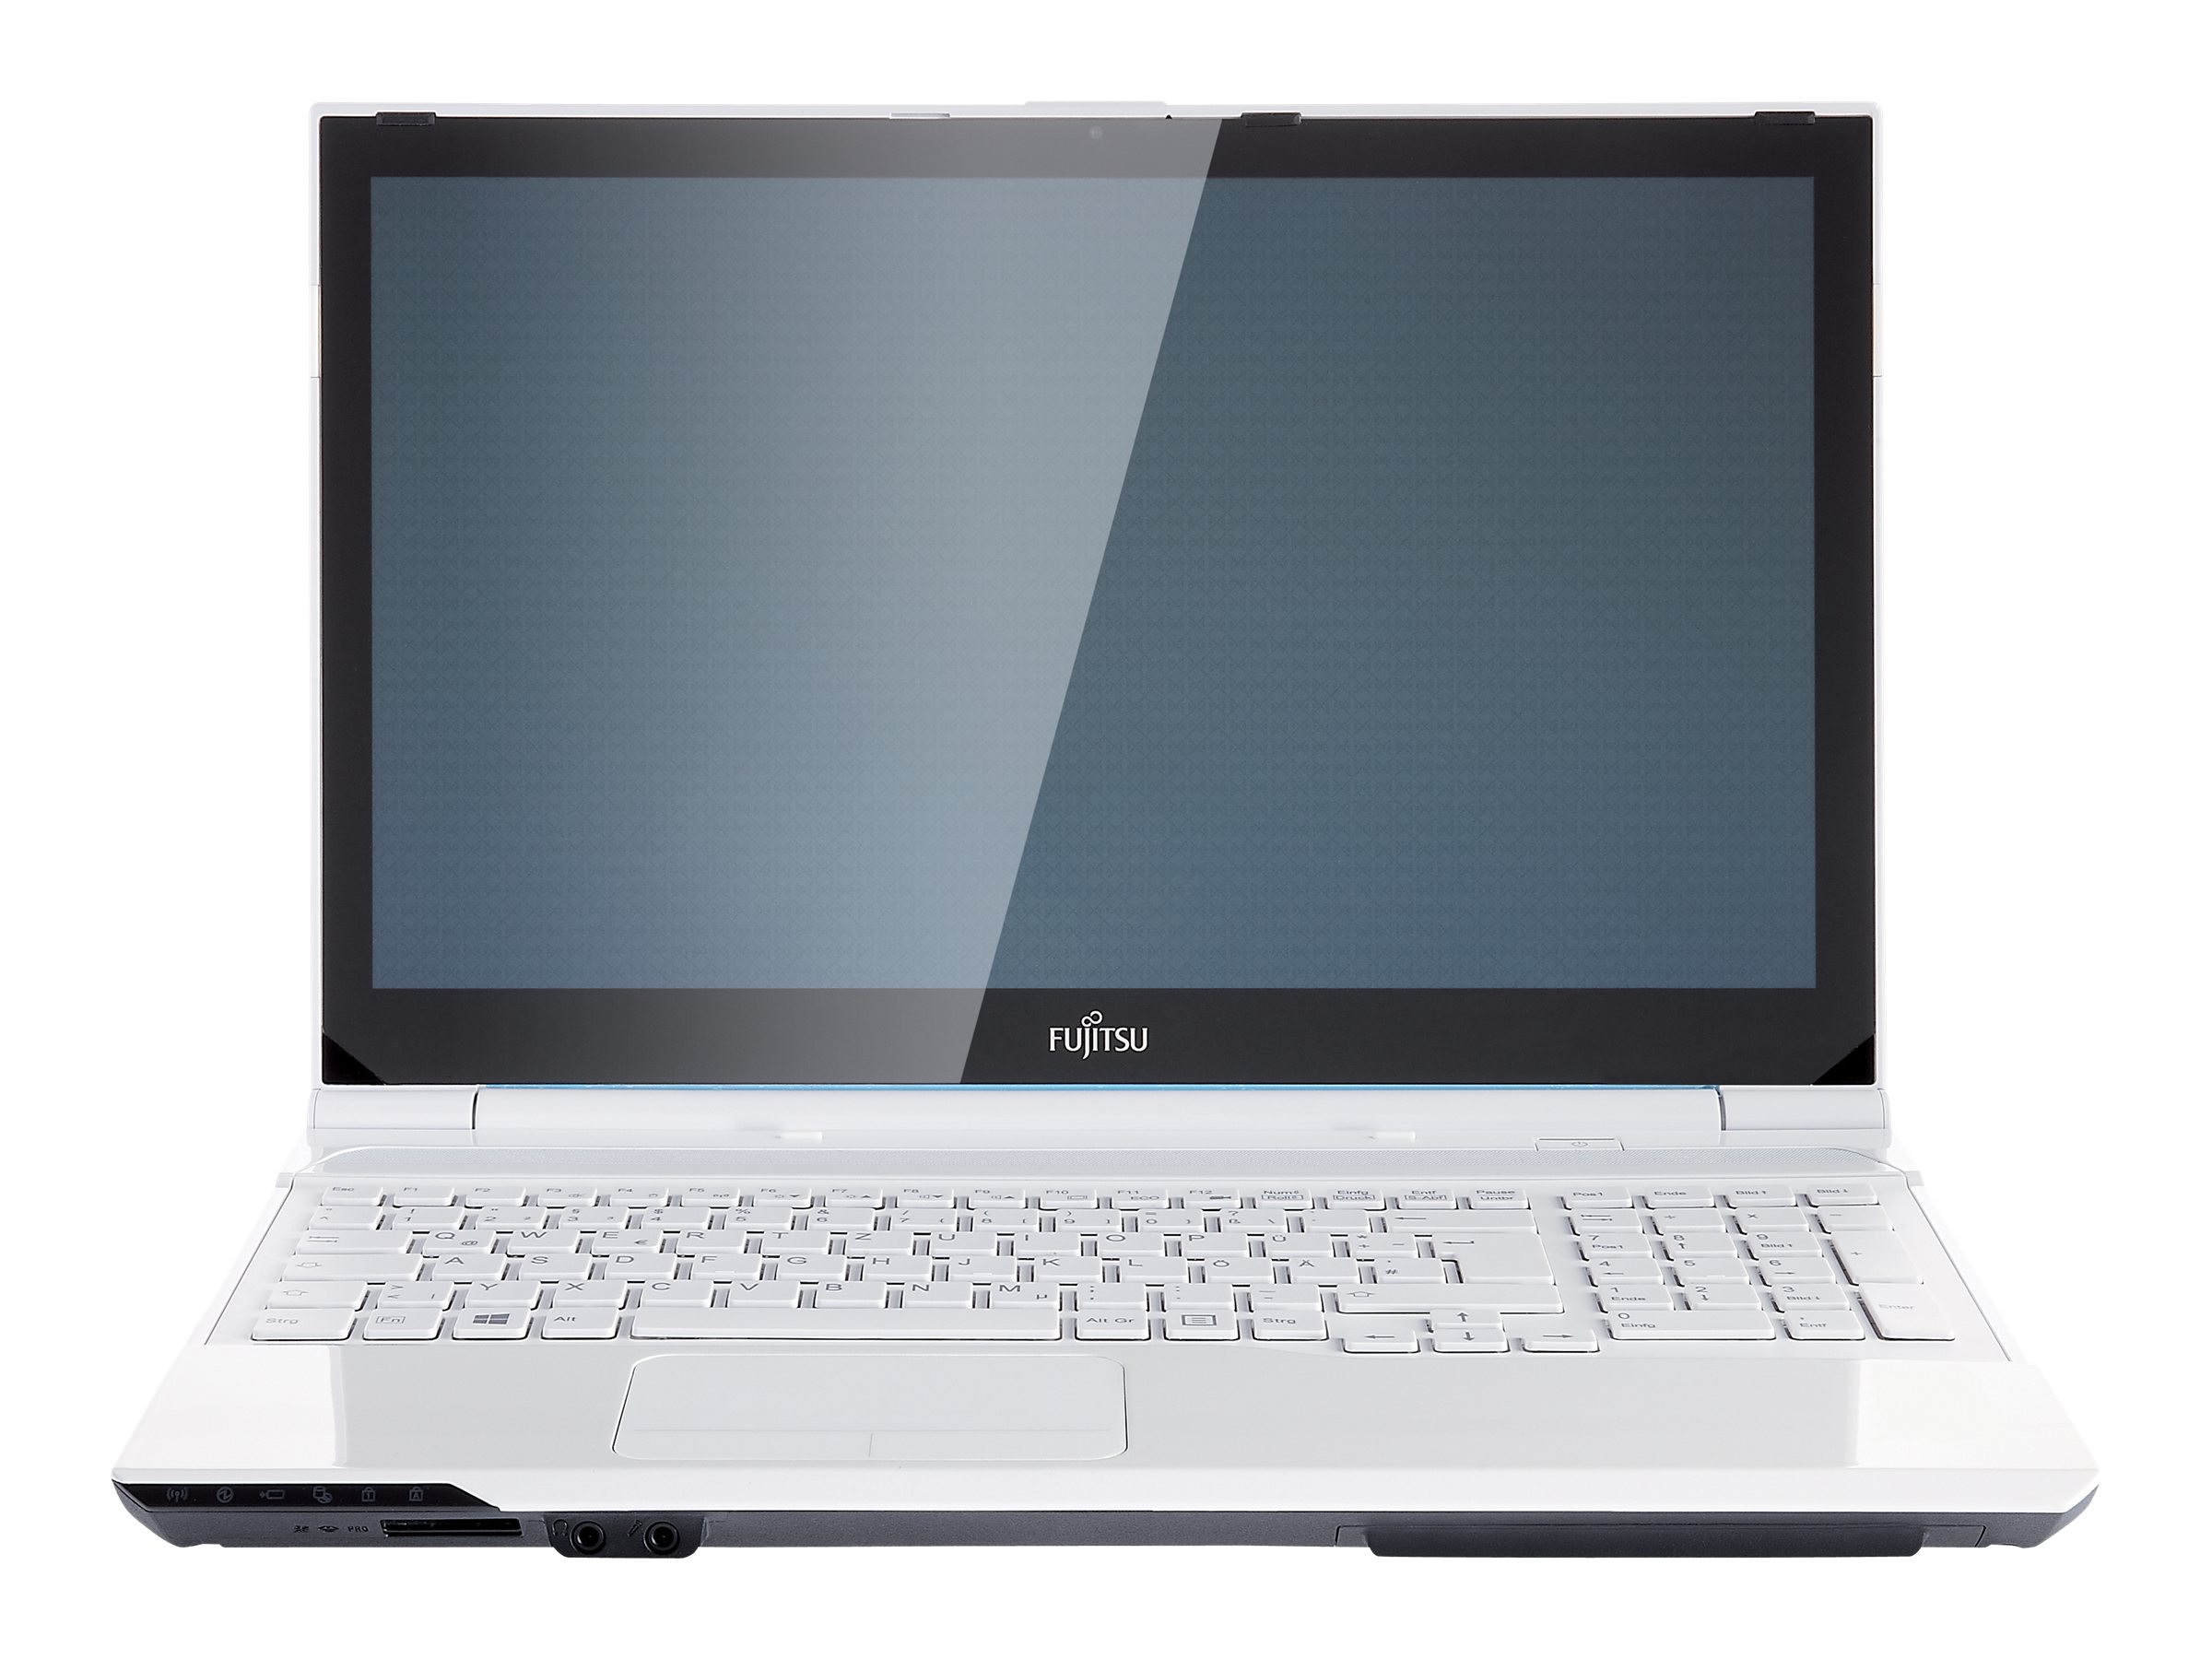 Fujitsu LIFEBOOK AH562 - pictures, photos and images